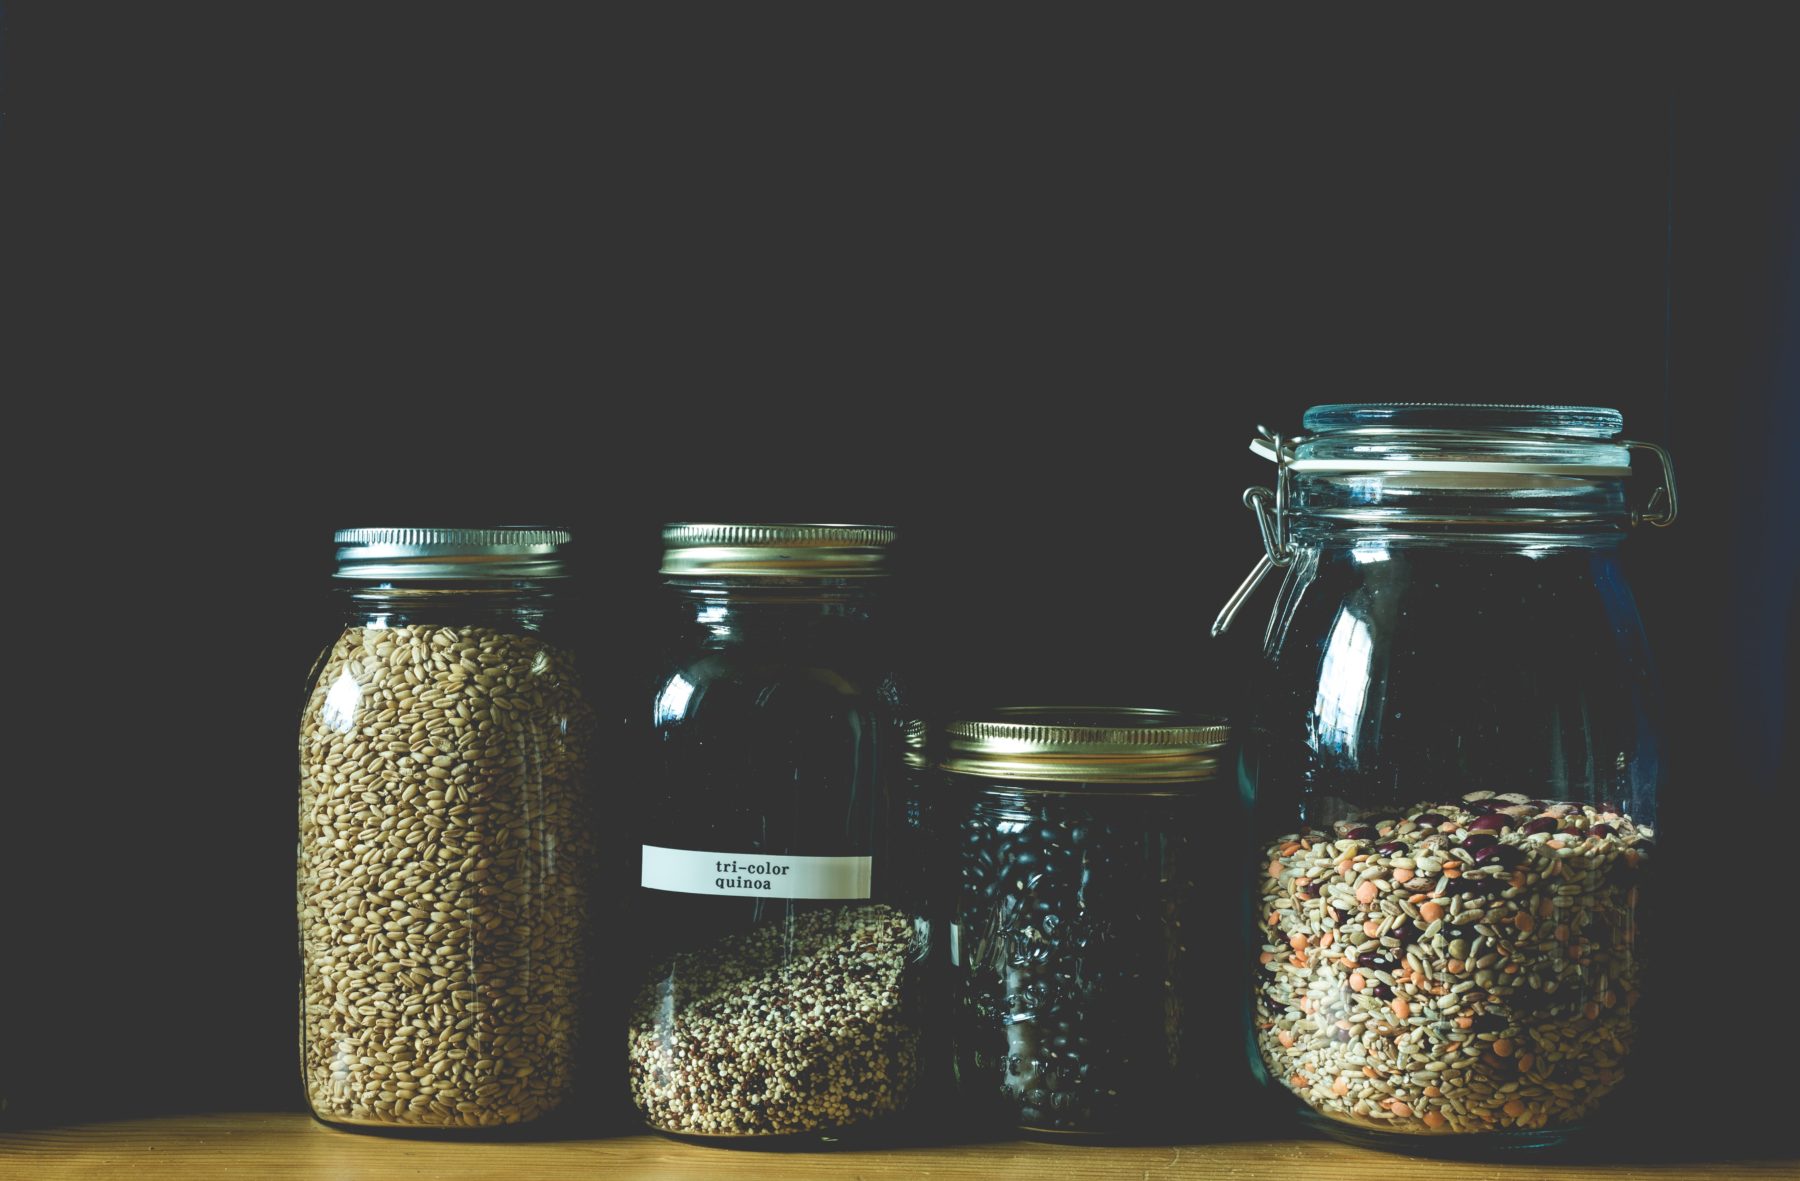 Four jars filled with quinoa and other super grains.